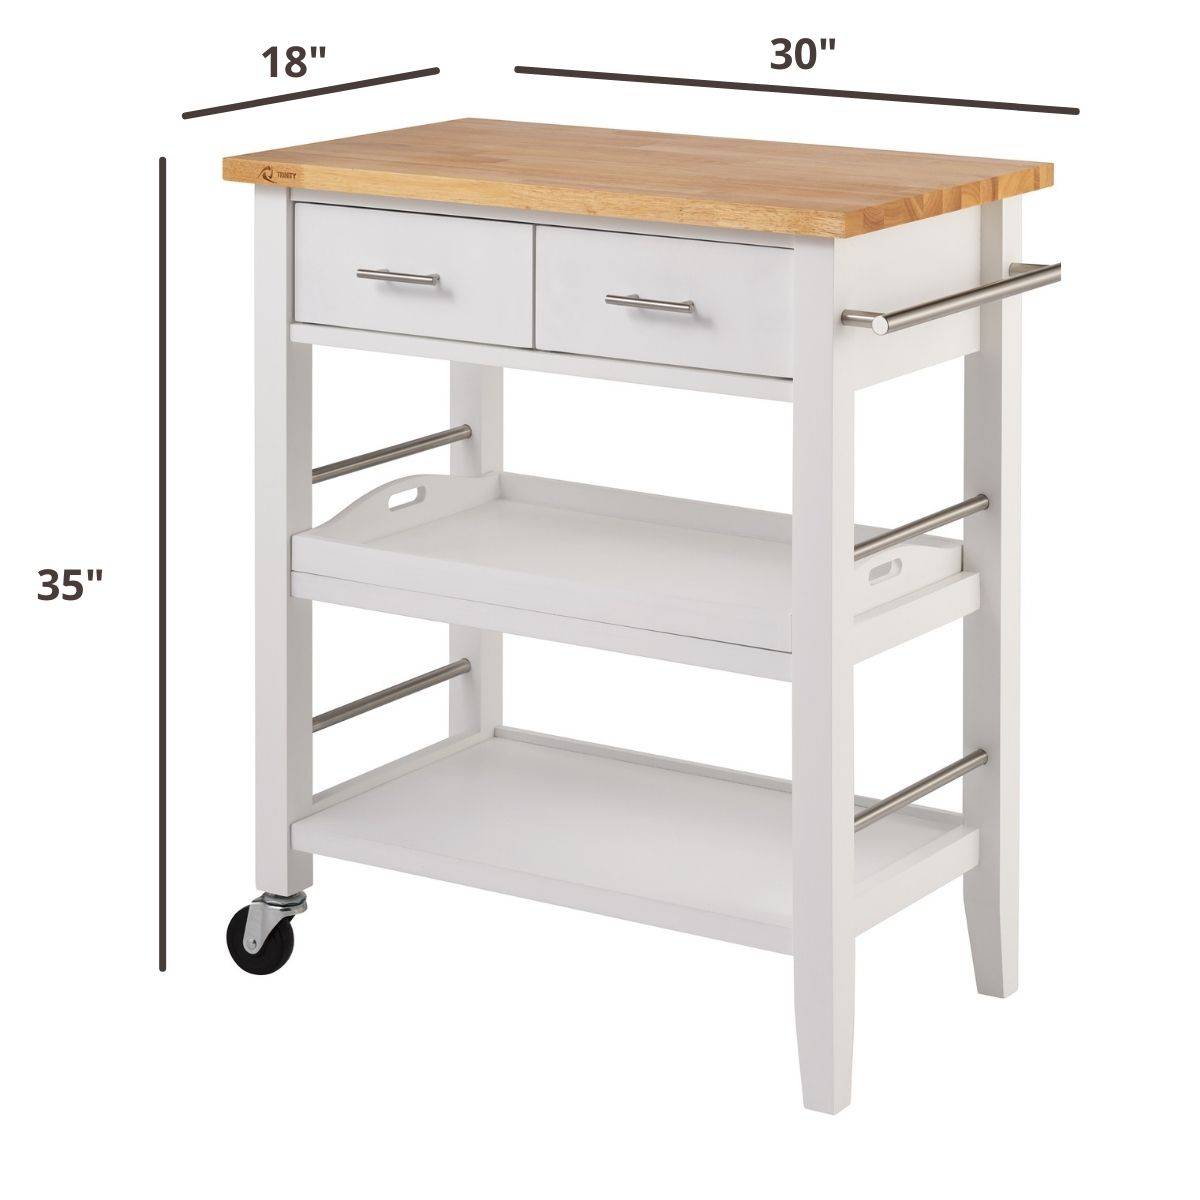 35 inches tall by 30 inches wide by 18 inches deep white kitchen cart